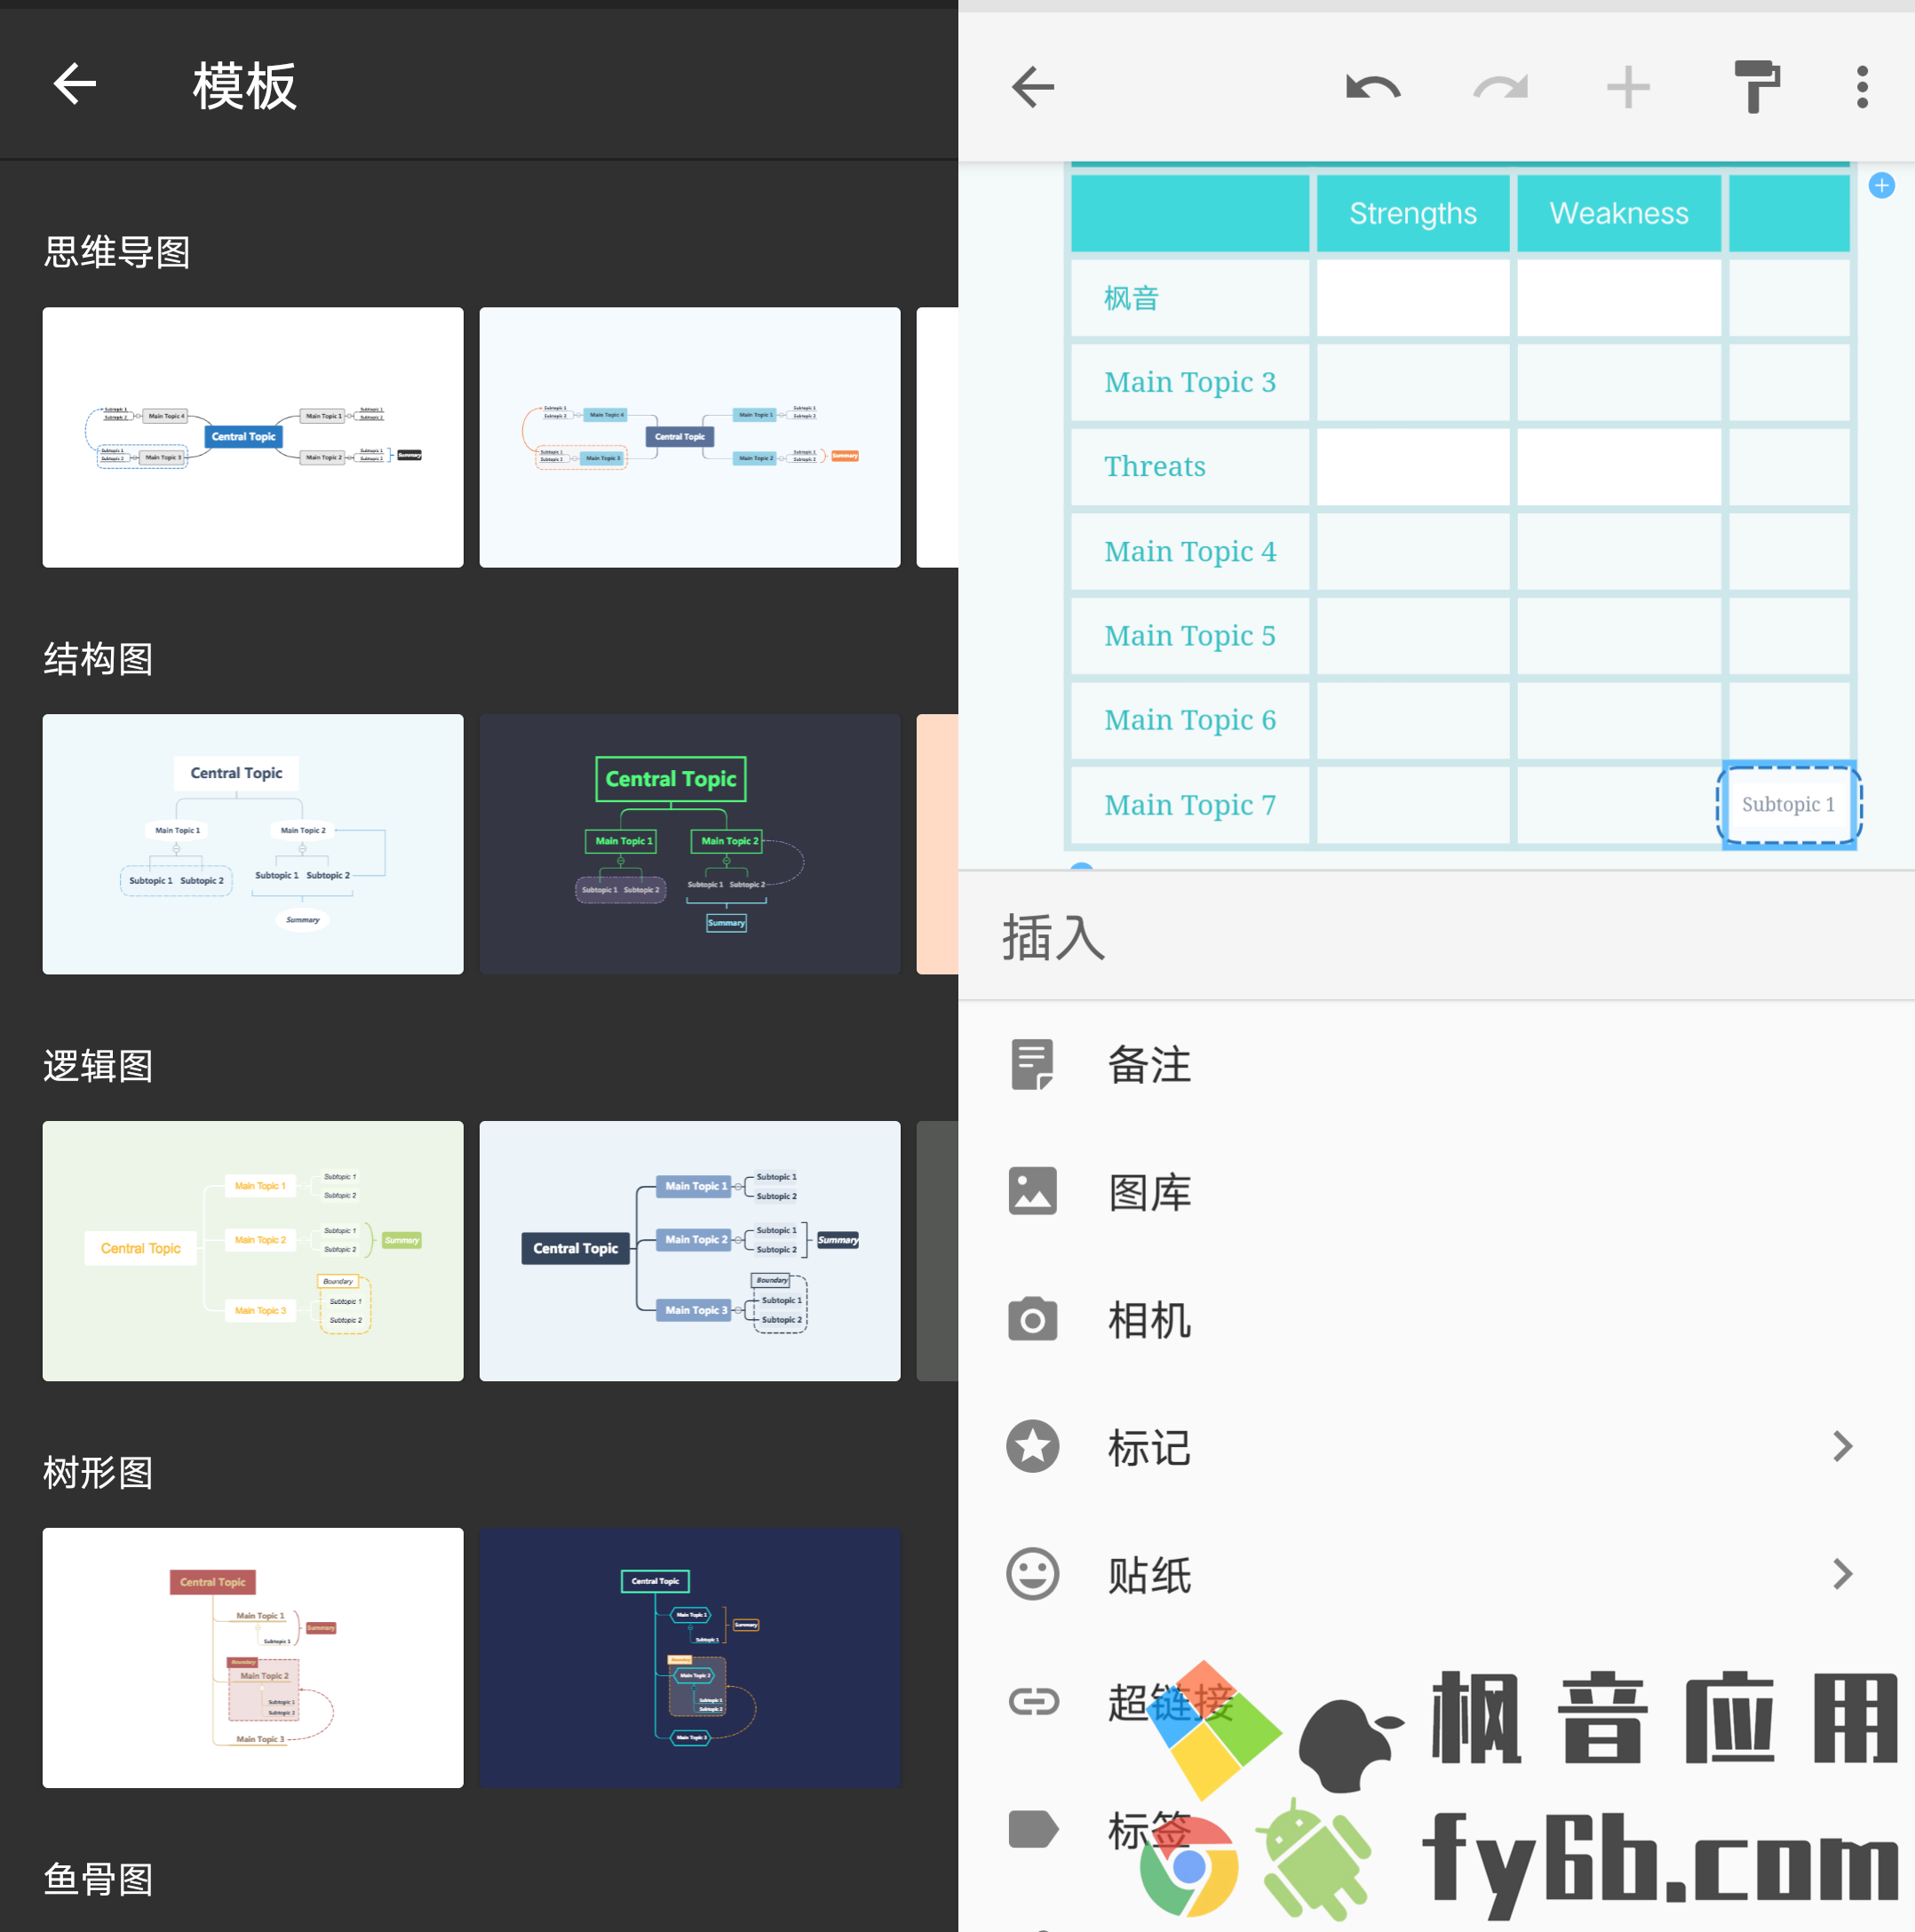 Android XMind思维导图_1.4.7